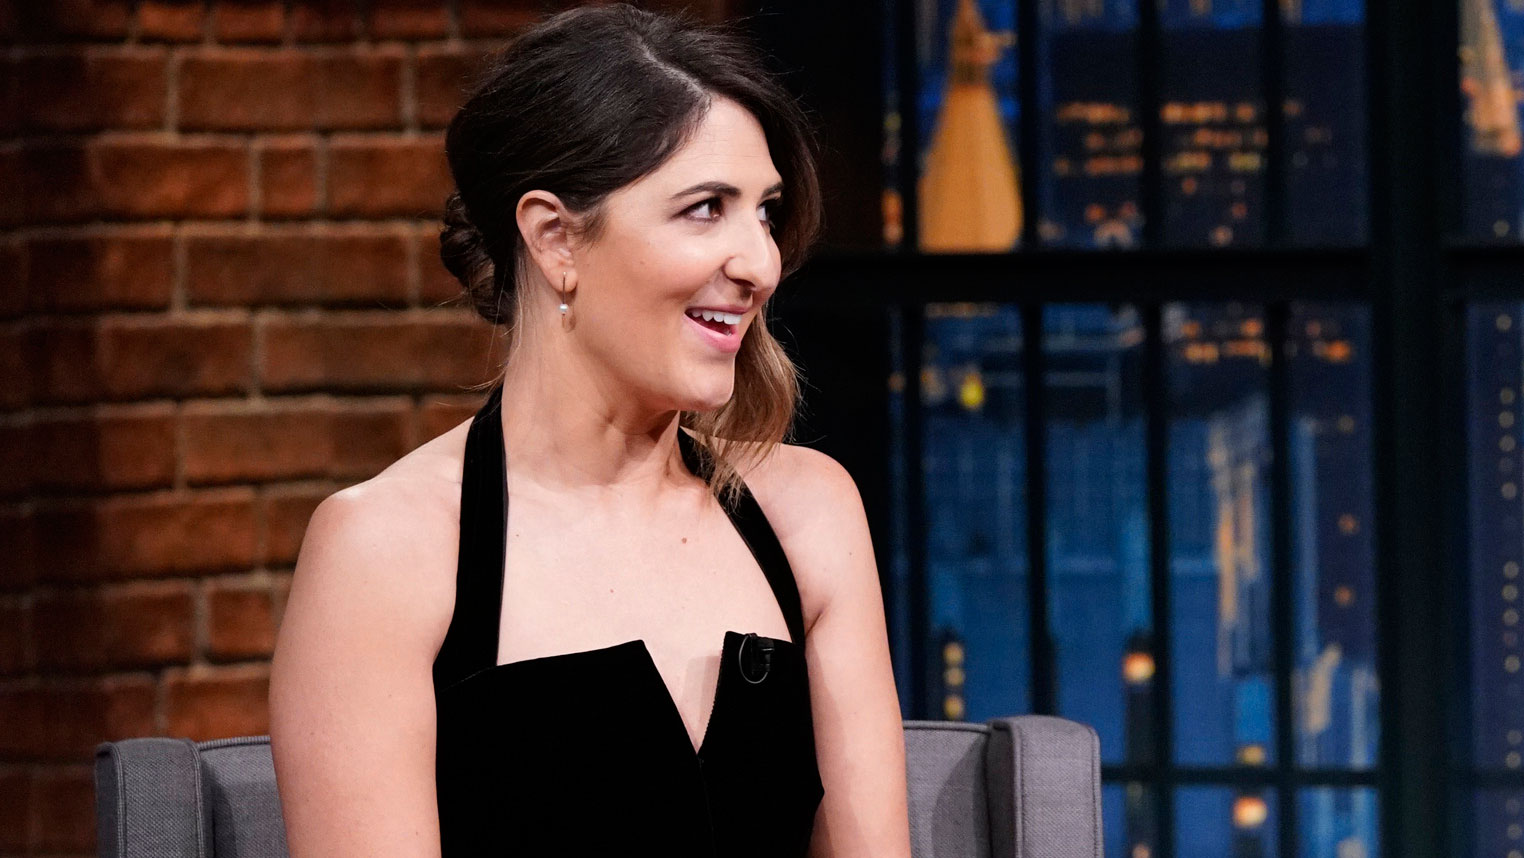 Watch Late Night with Seth Meyers Interview: D'Arcy Carden Talks About Impersonating ...